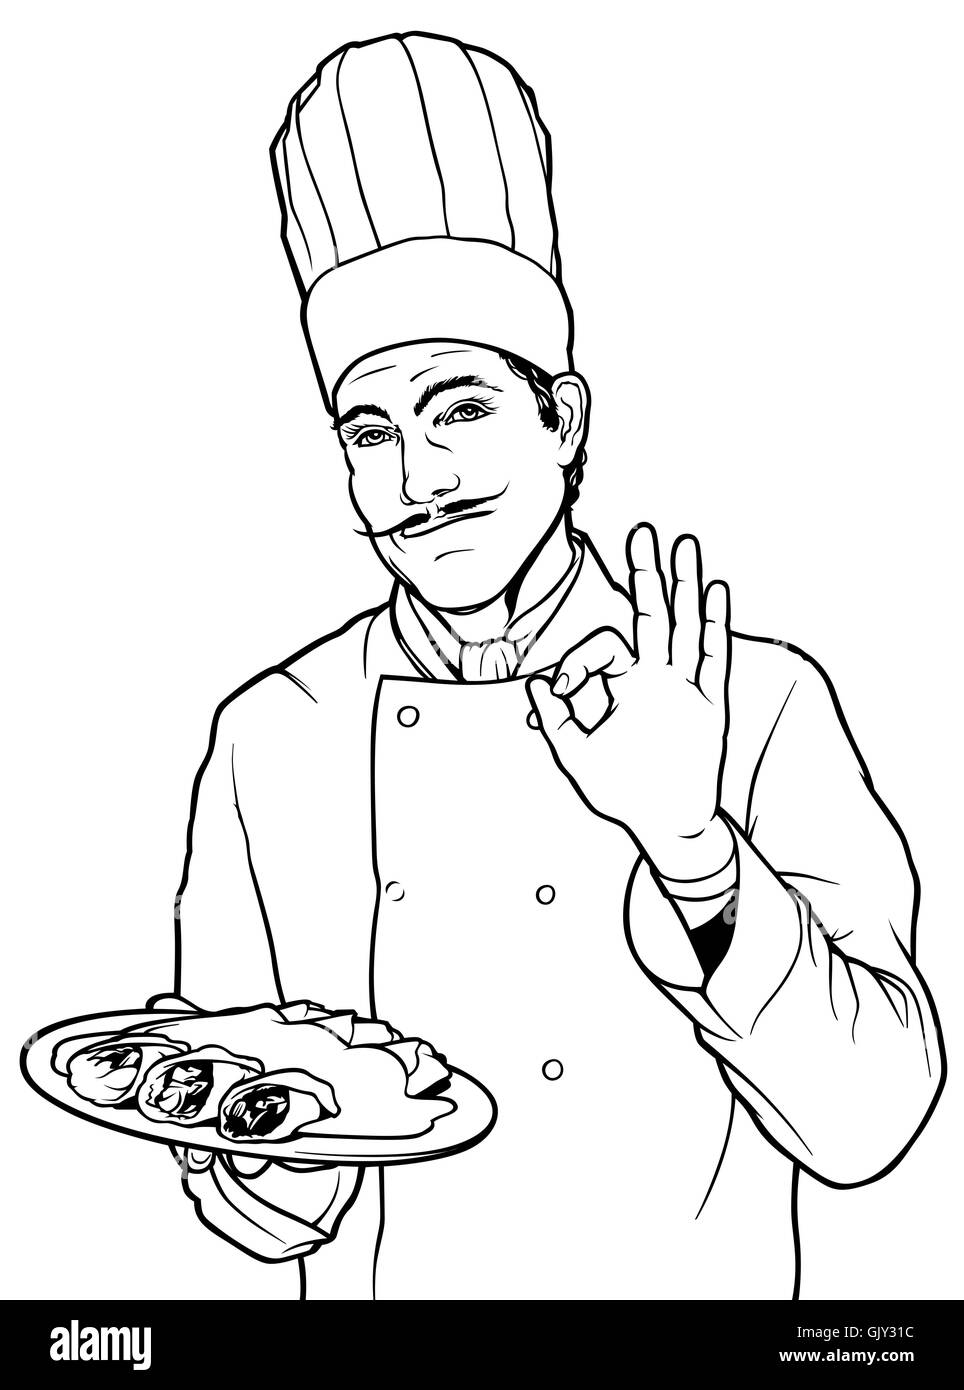 Cook Chef Gesturing GJY31C 